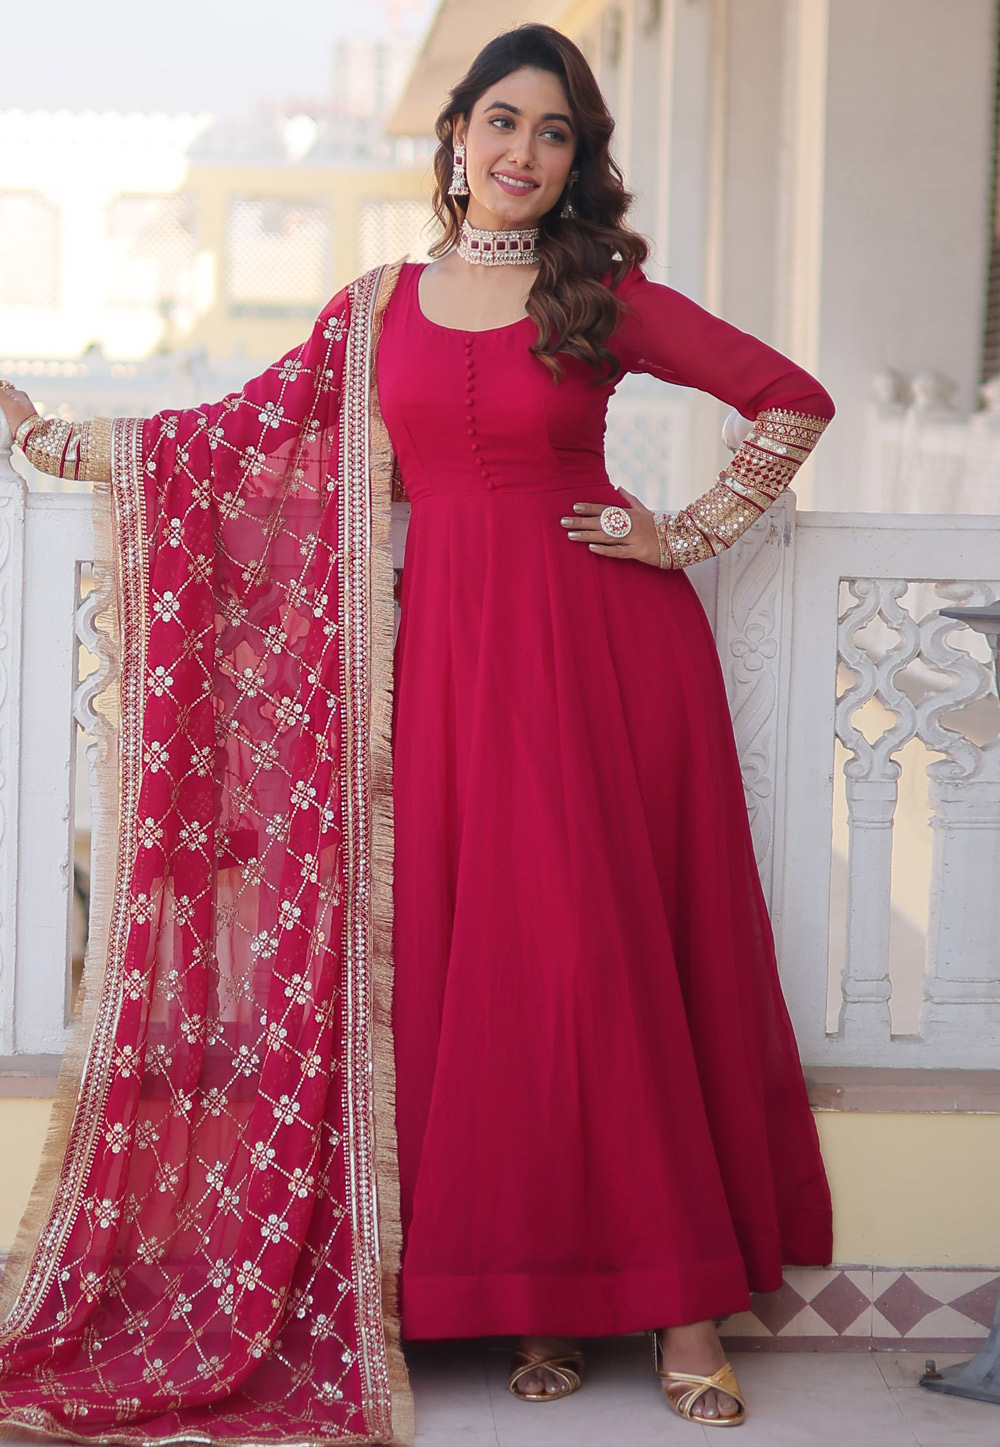 https://resources.indianclothstore.com/resources/productimages/Magenta-Faux-Georgette-Readymade-Anarkali-Suit-18345225012024.jpg